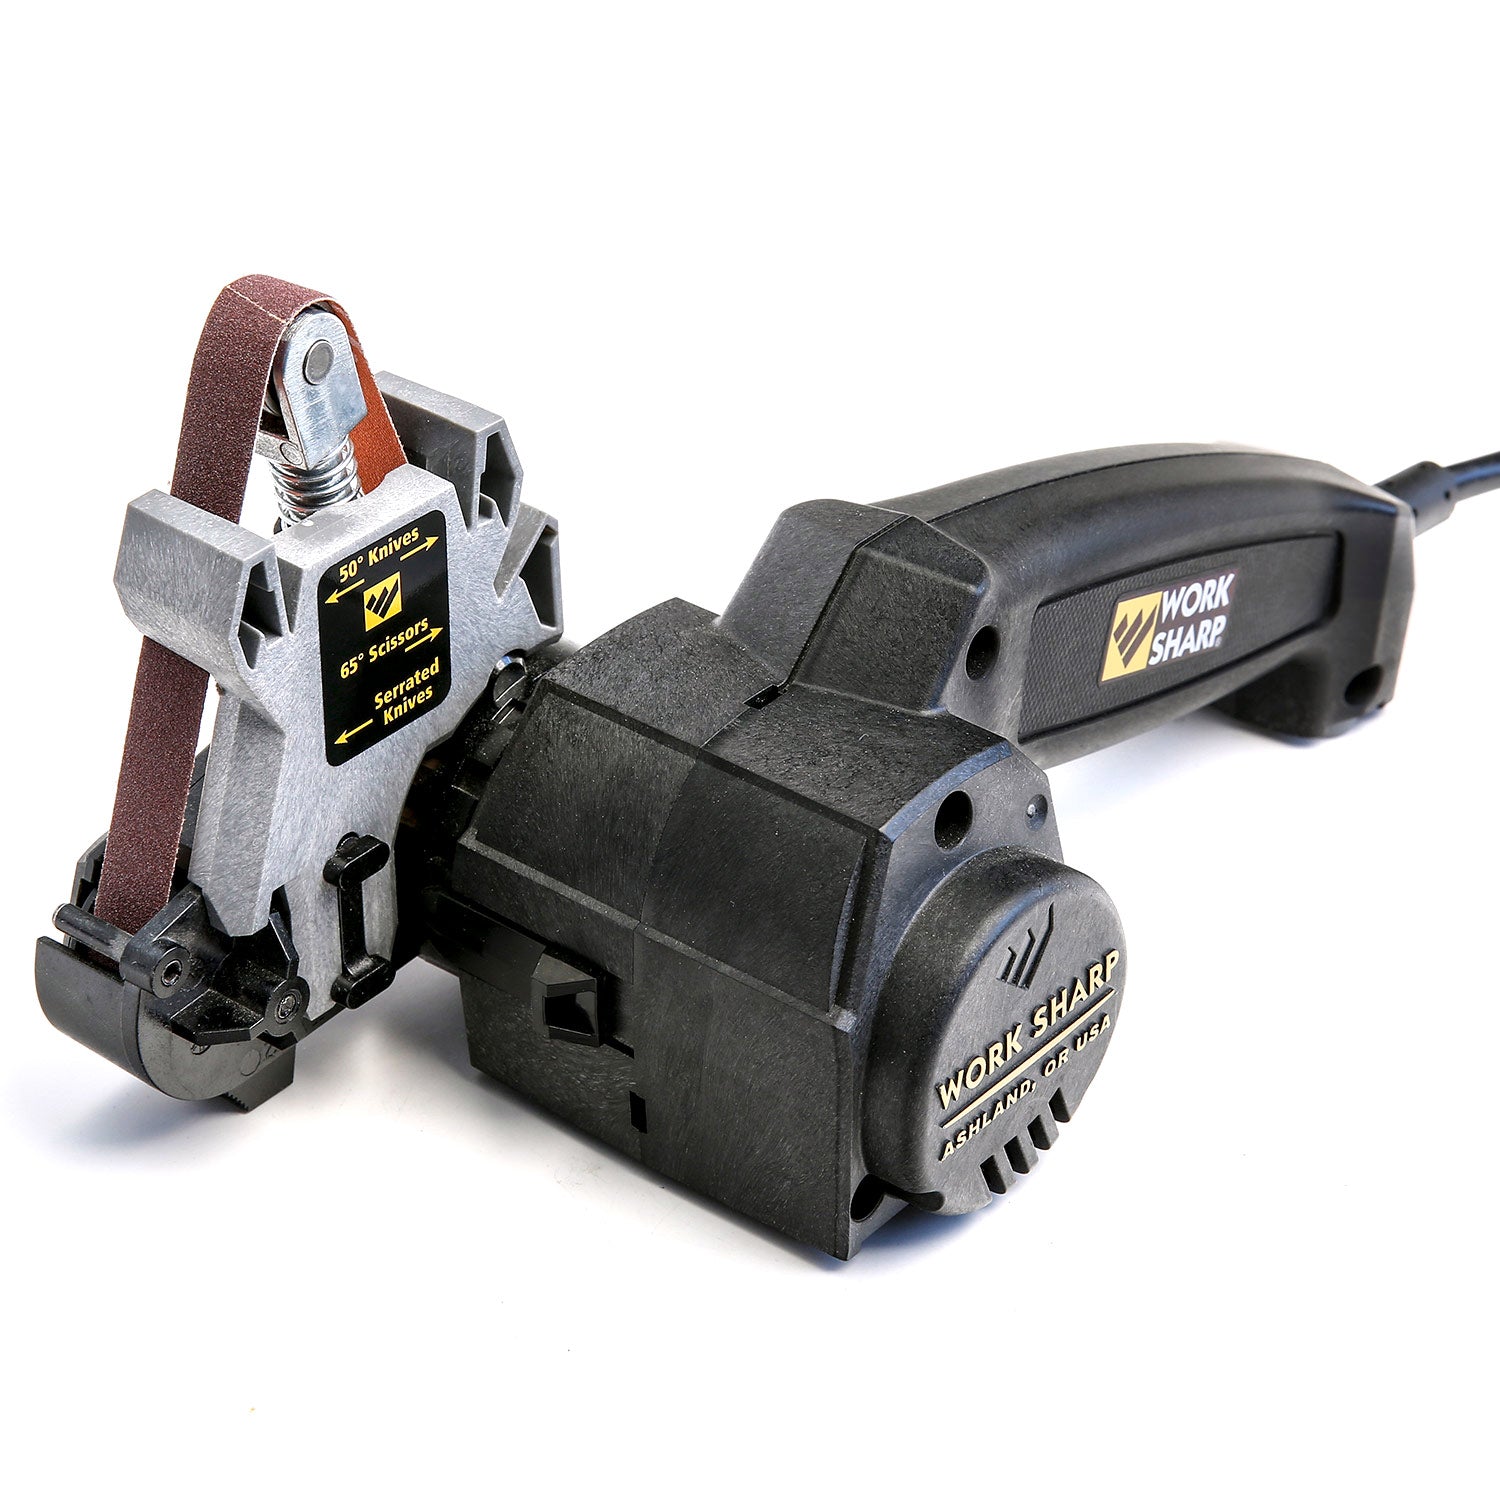 Select your sharpener to view manuals and videos: - Work Sharp Sharpeners